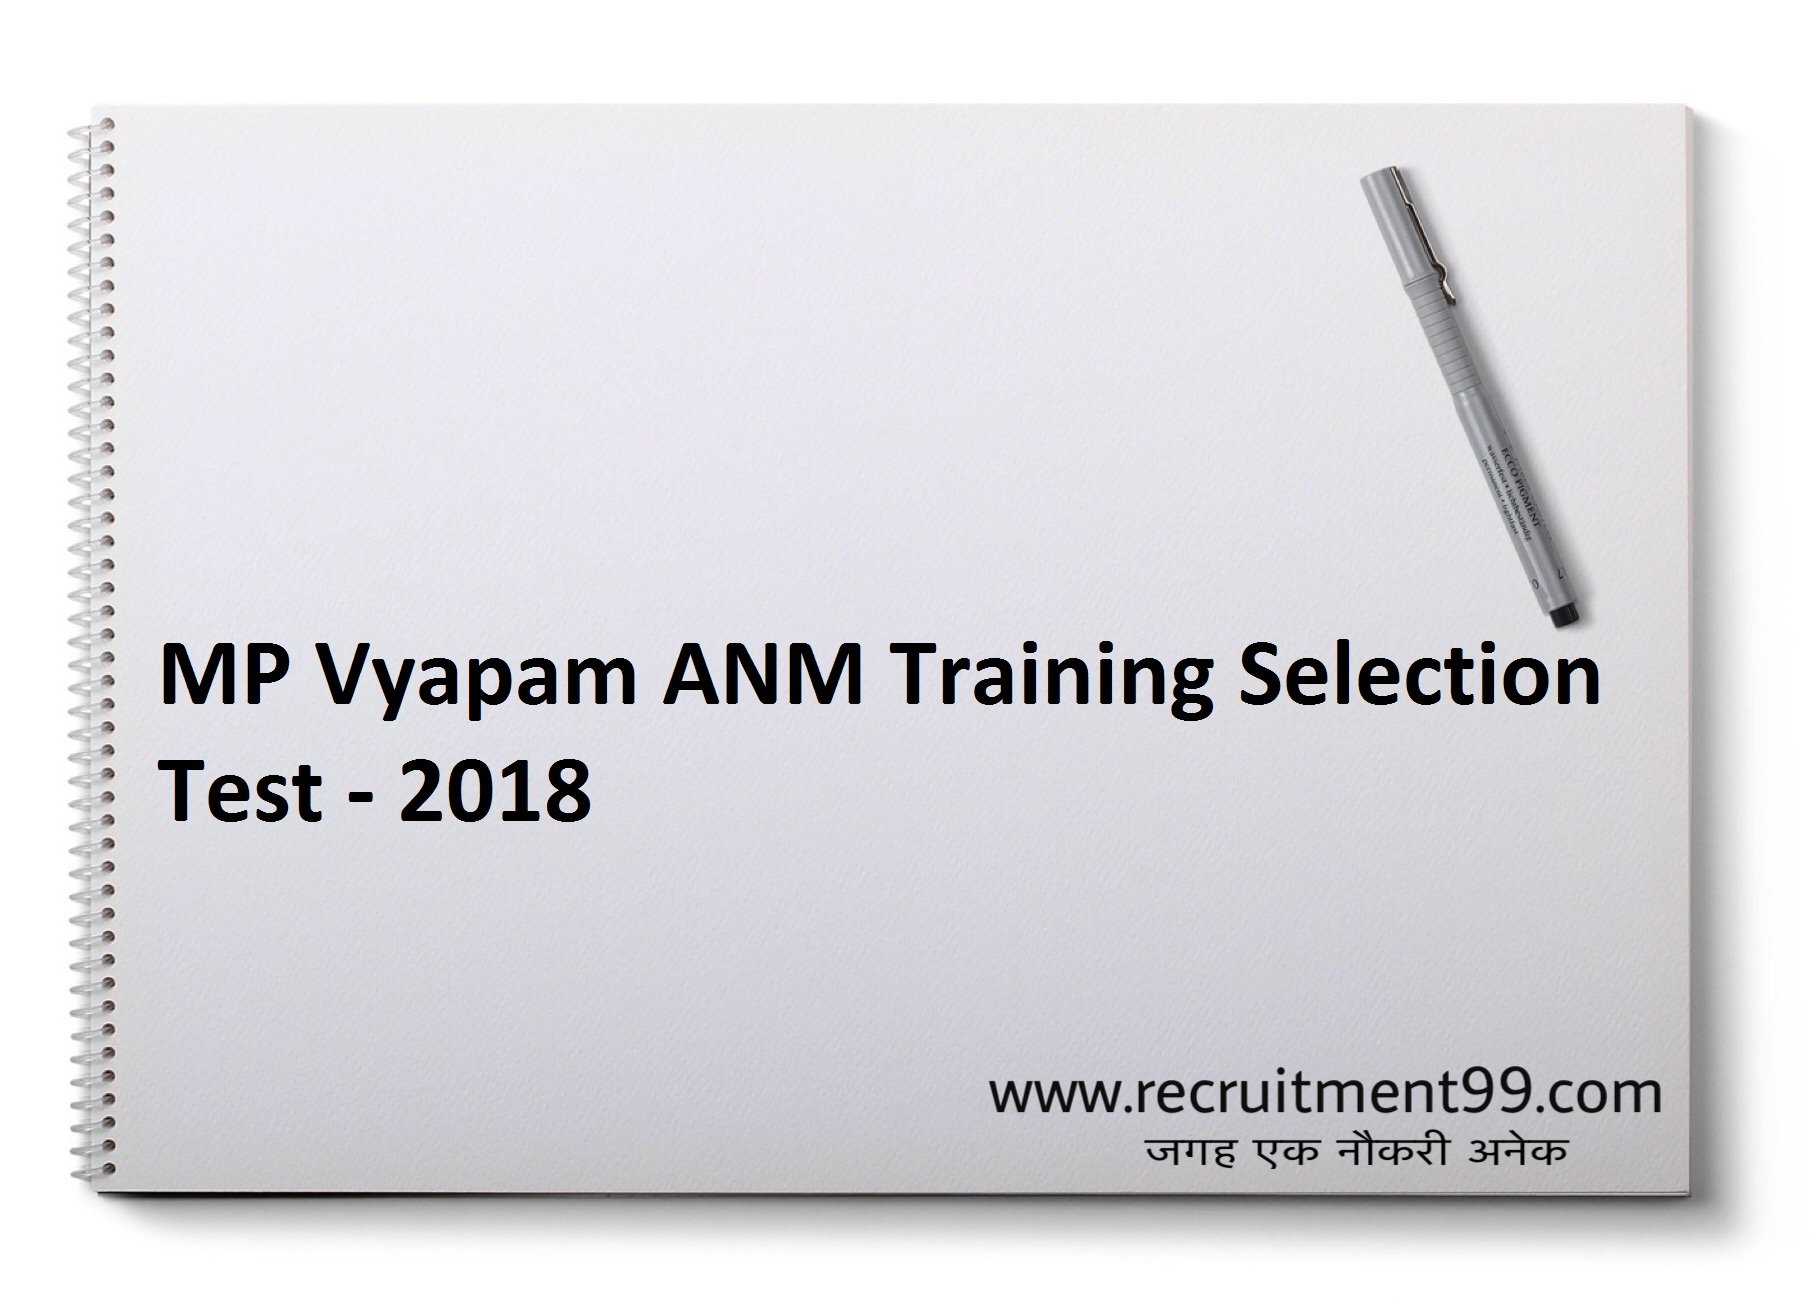 MP Vyapam AMTST Admit Card Result Counseling 2018